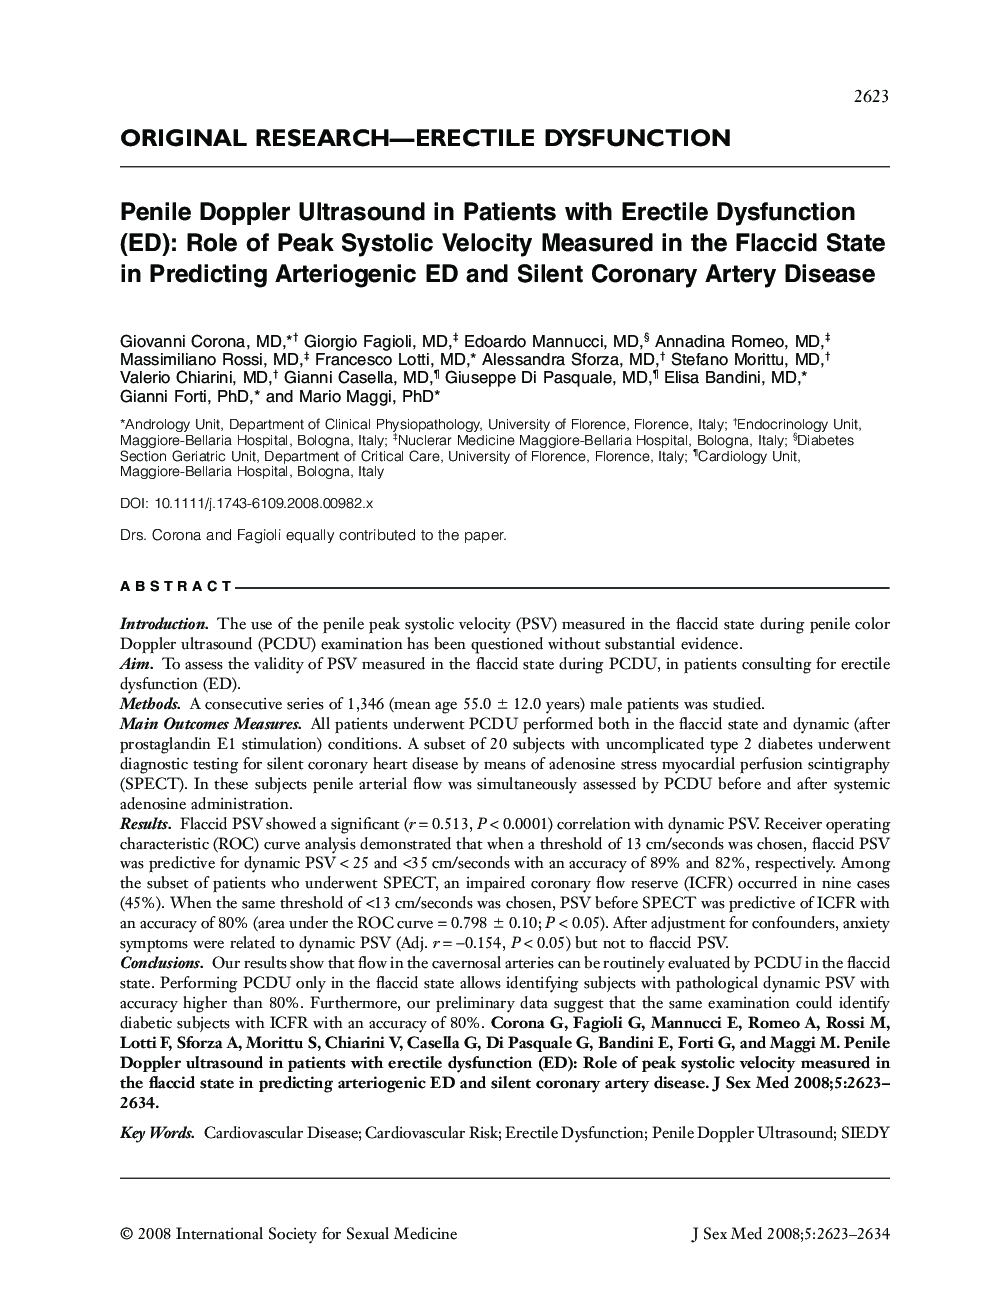 ORIGINAL RESEARCH-ERECTILE DYSFUNCTION: Penile Doppler Ultrasound in Patients with Erectile Dysfunction (ED): Role of Peak Systolic Velocity Measured in the Flaccid State in Predicting Arteriogenic ED and Silent Coronary Artery Disease